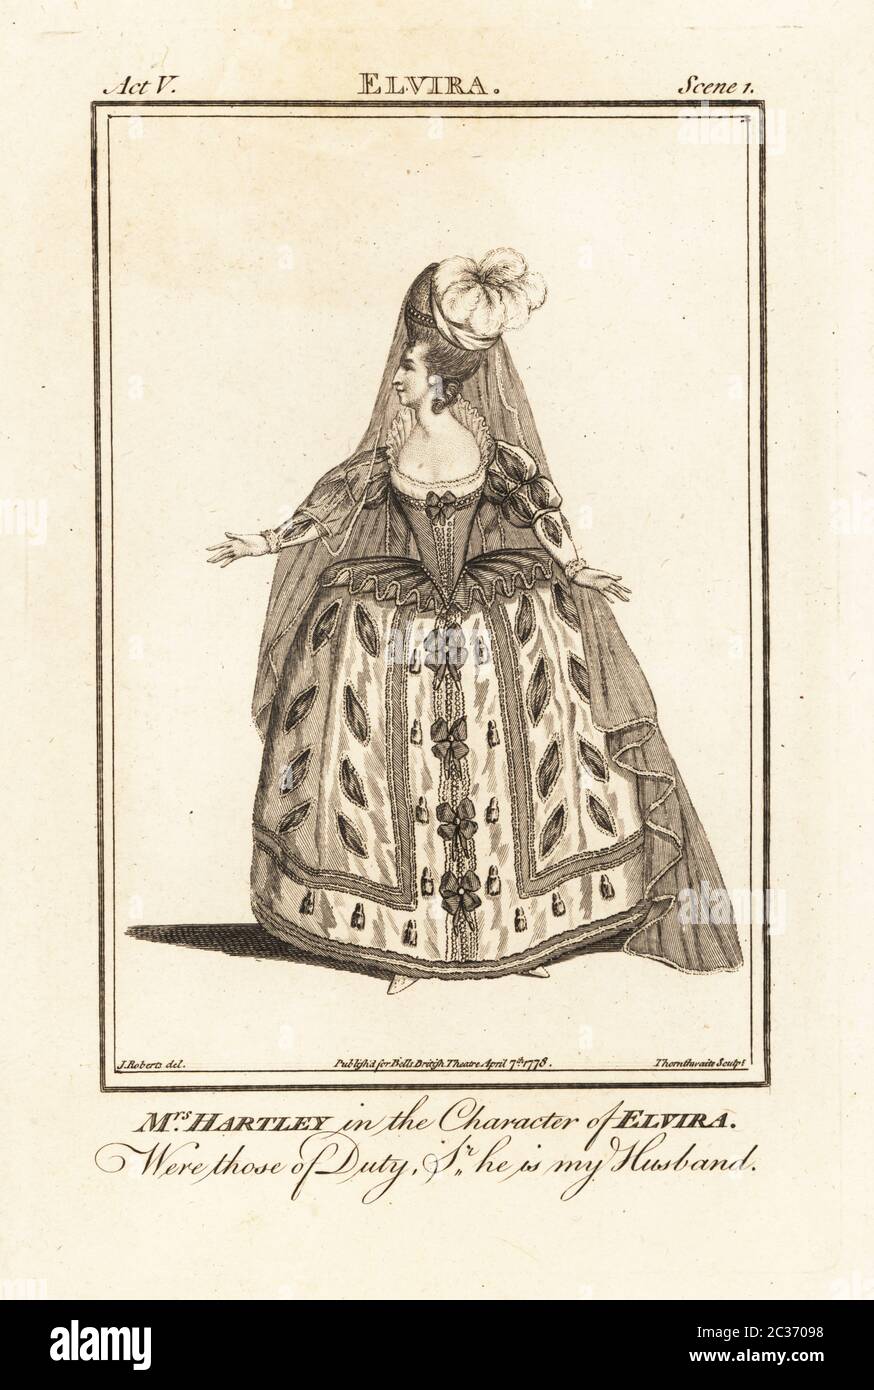 Mrs Elizabeth Hartley in the character of Elvira in David Mallet’s Elvira. However, the play was not performed in London in the during her career. Elizabeth Hartley was a famous actor on the London stage and scandalous figure, 1750?–1824. Copperplate engraving by J. Thornthwaite after an illustration by James Roberts from Bell’s British Theatre, Consisting of the most esteemed English Plays, John Bell, London, 1778. Stock Photo